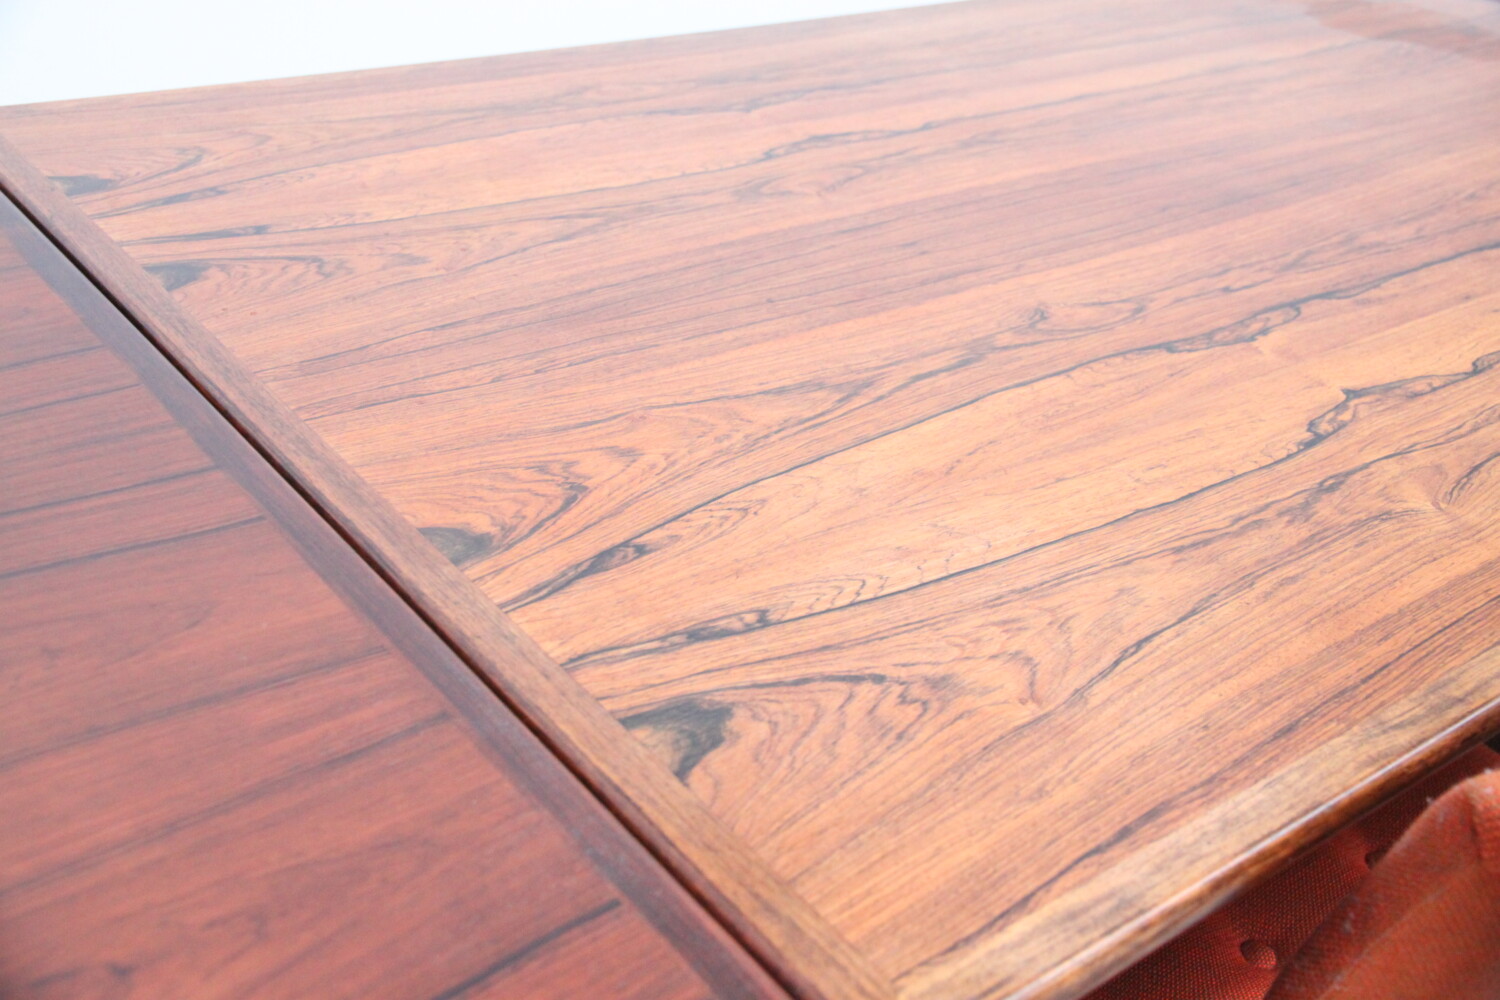 Rosewood Table by Omann Jun